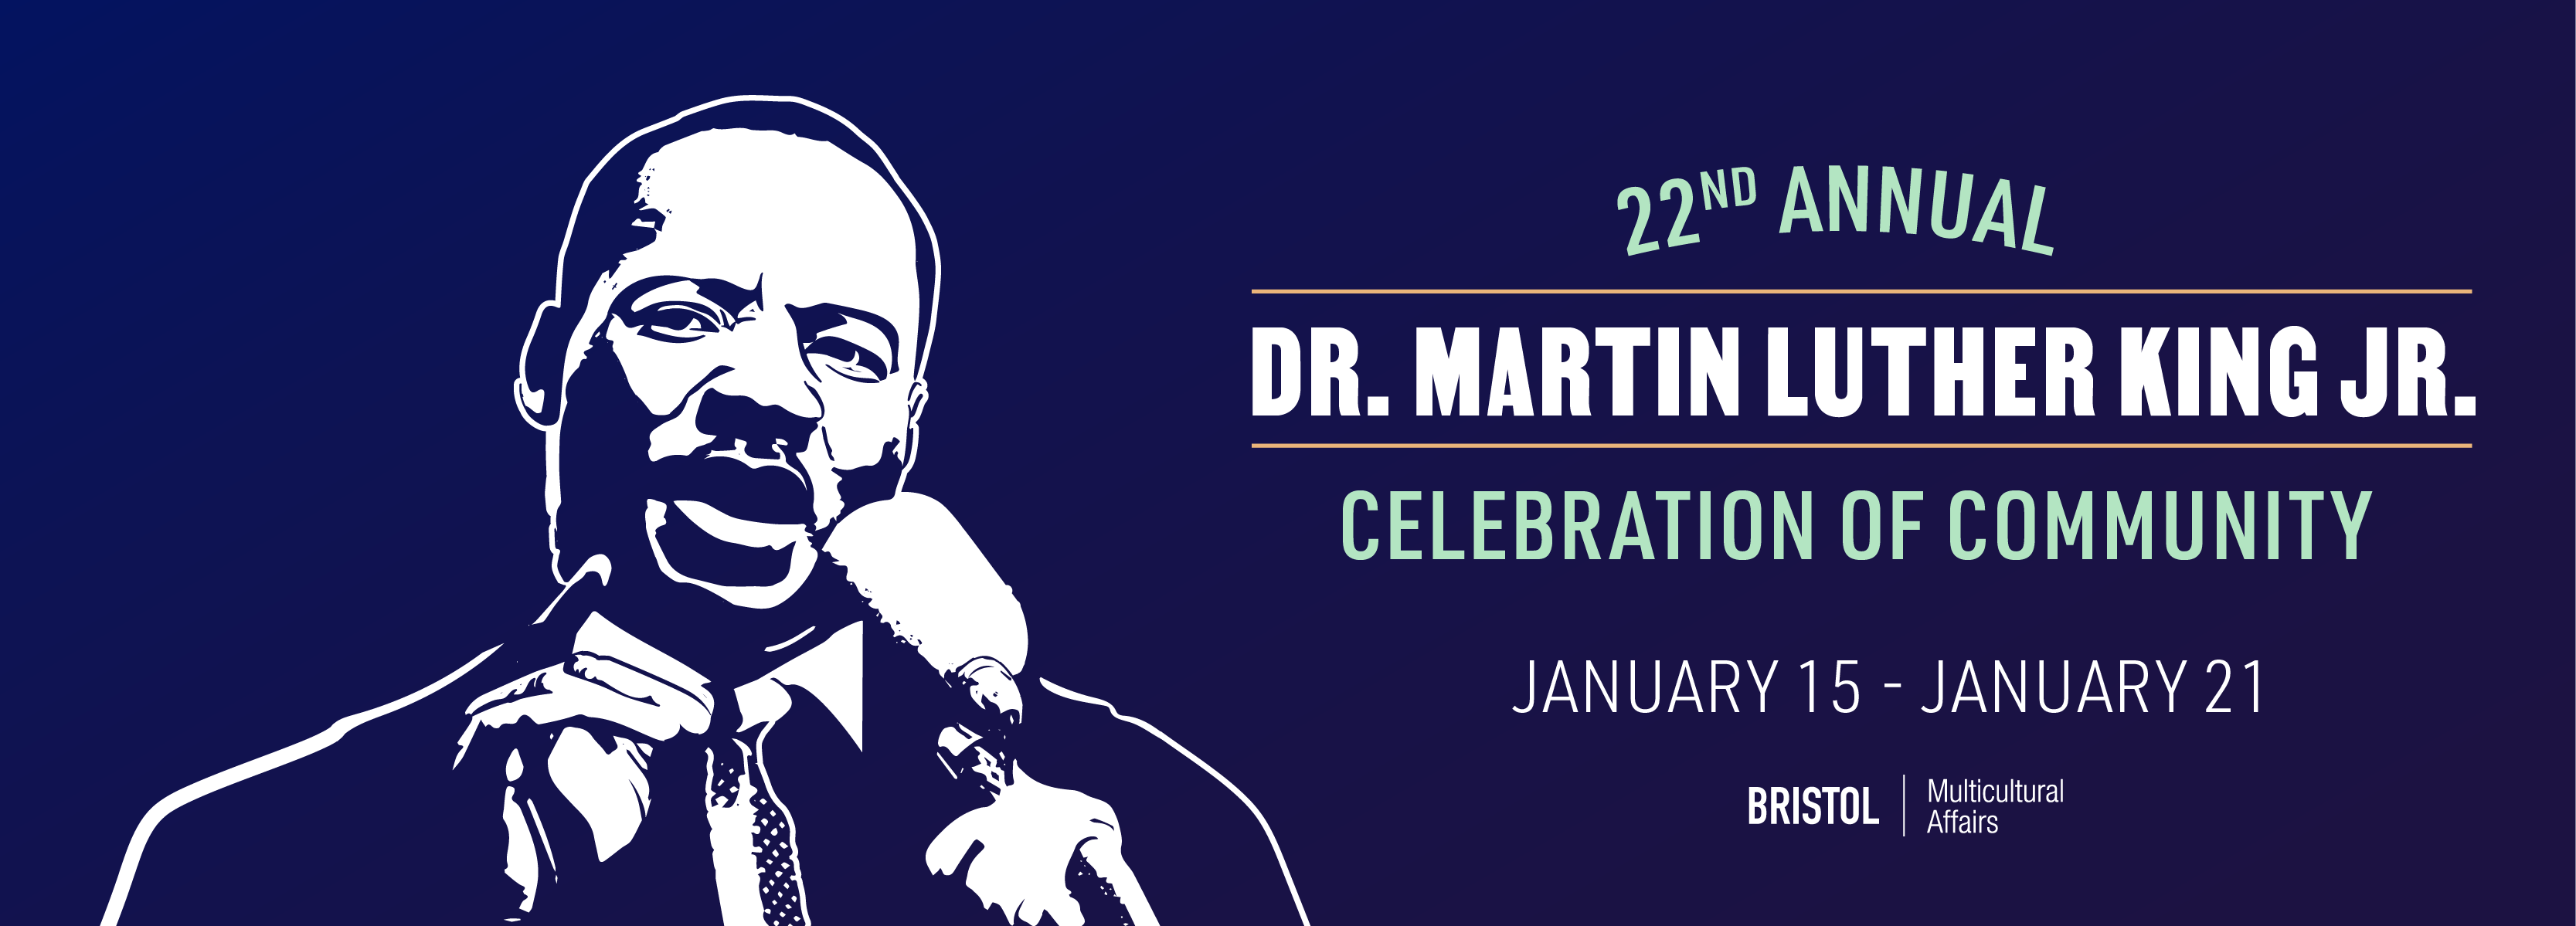 22nd ANNUAL DR. MARTIN LUTHER KING JR. CELEBRATION OF COMMUNITY